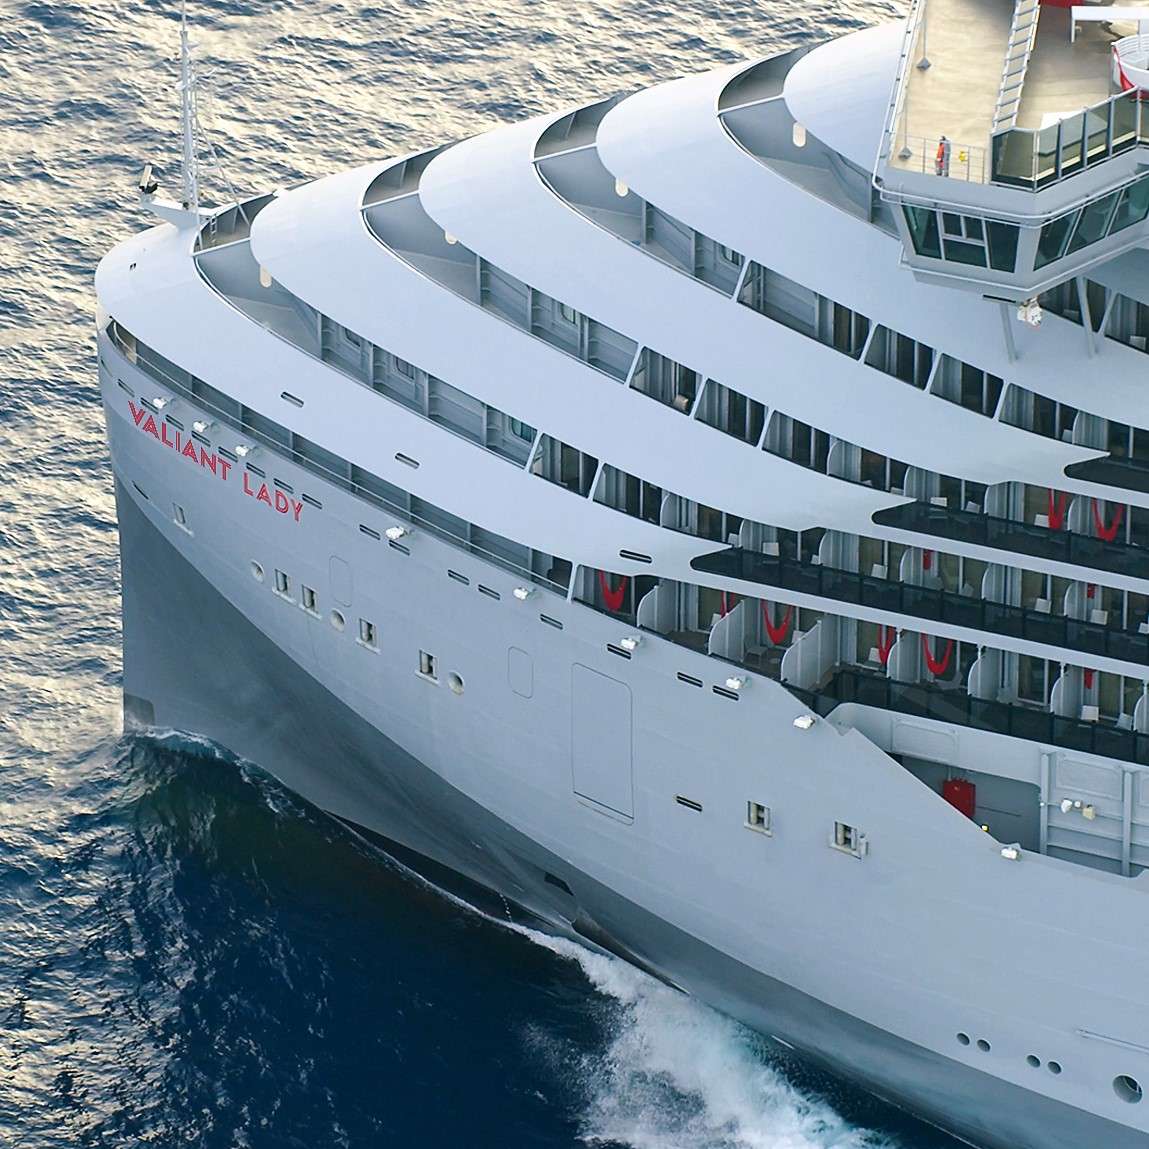 Valiant Lady makes UK debut in 2022  CRUISE TO TRAVEL